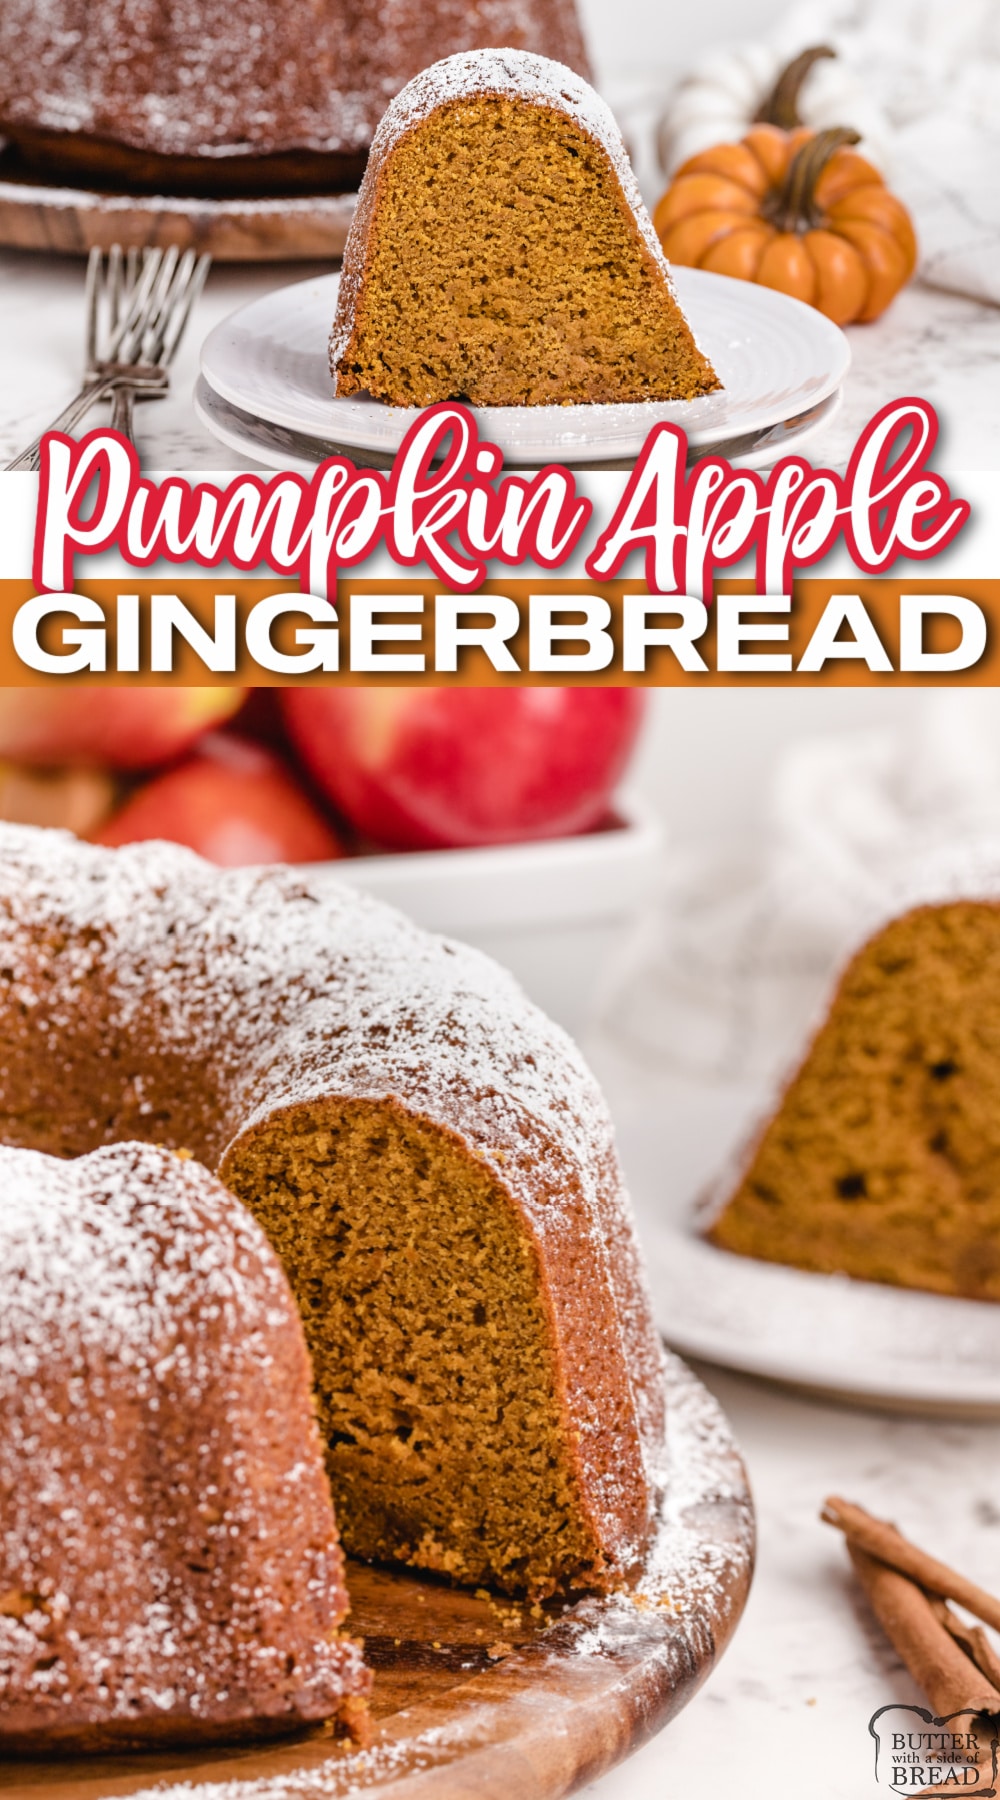 Pumpkin Apple Gingerbread made with canned pumpkin and shredded apple. All of your favorite fall flavors in one delicious gingerbread recipe!